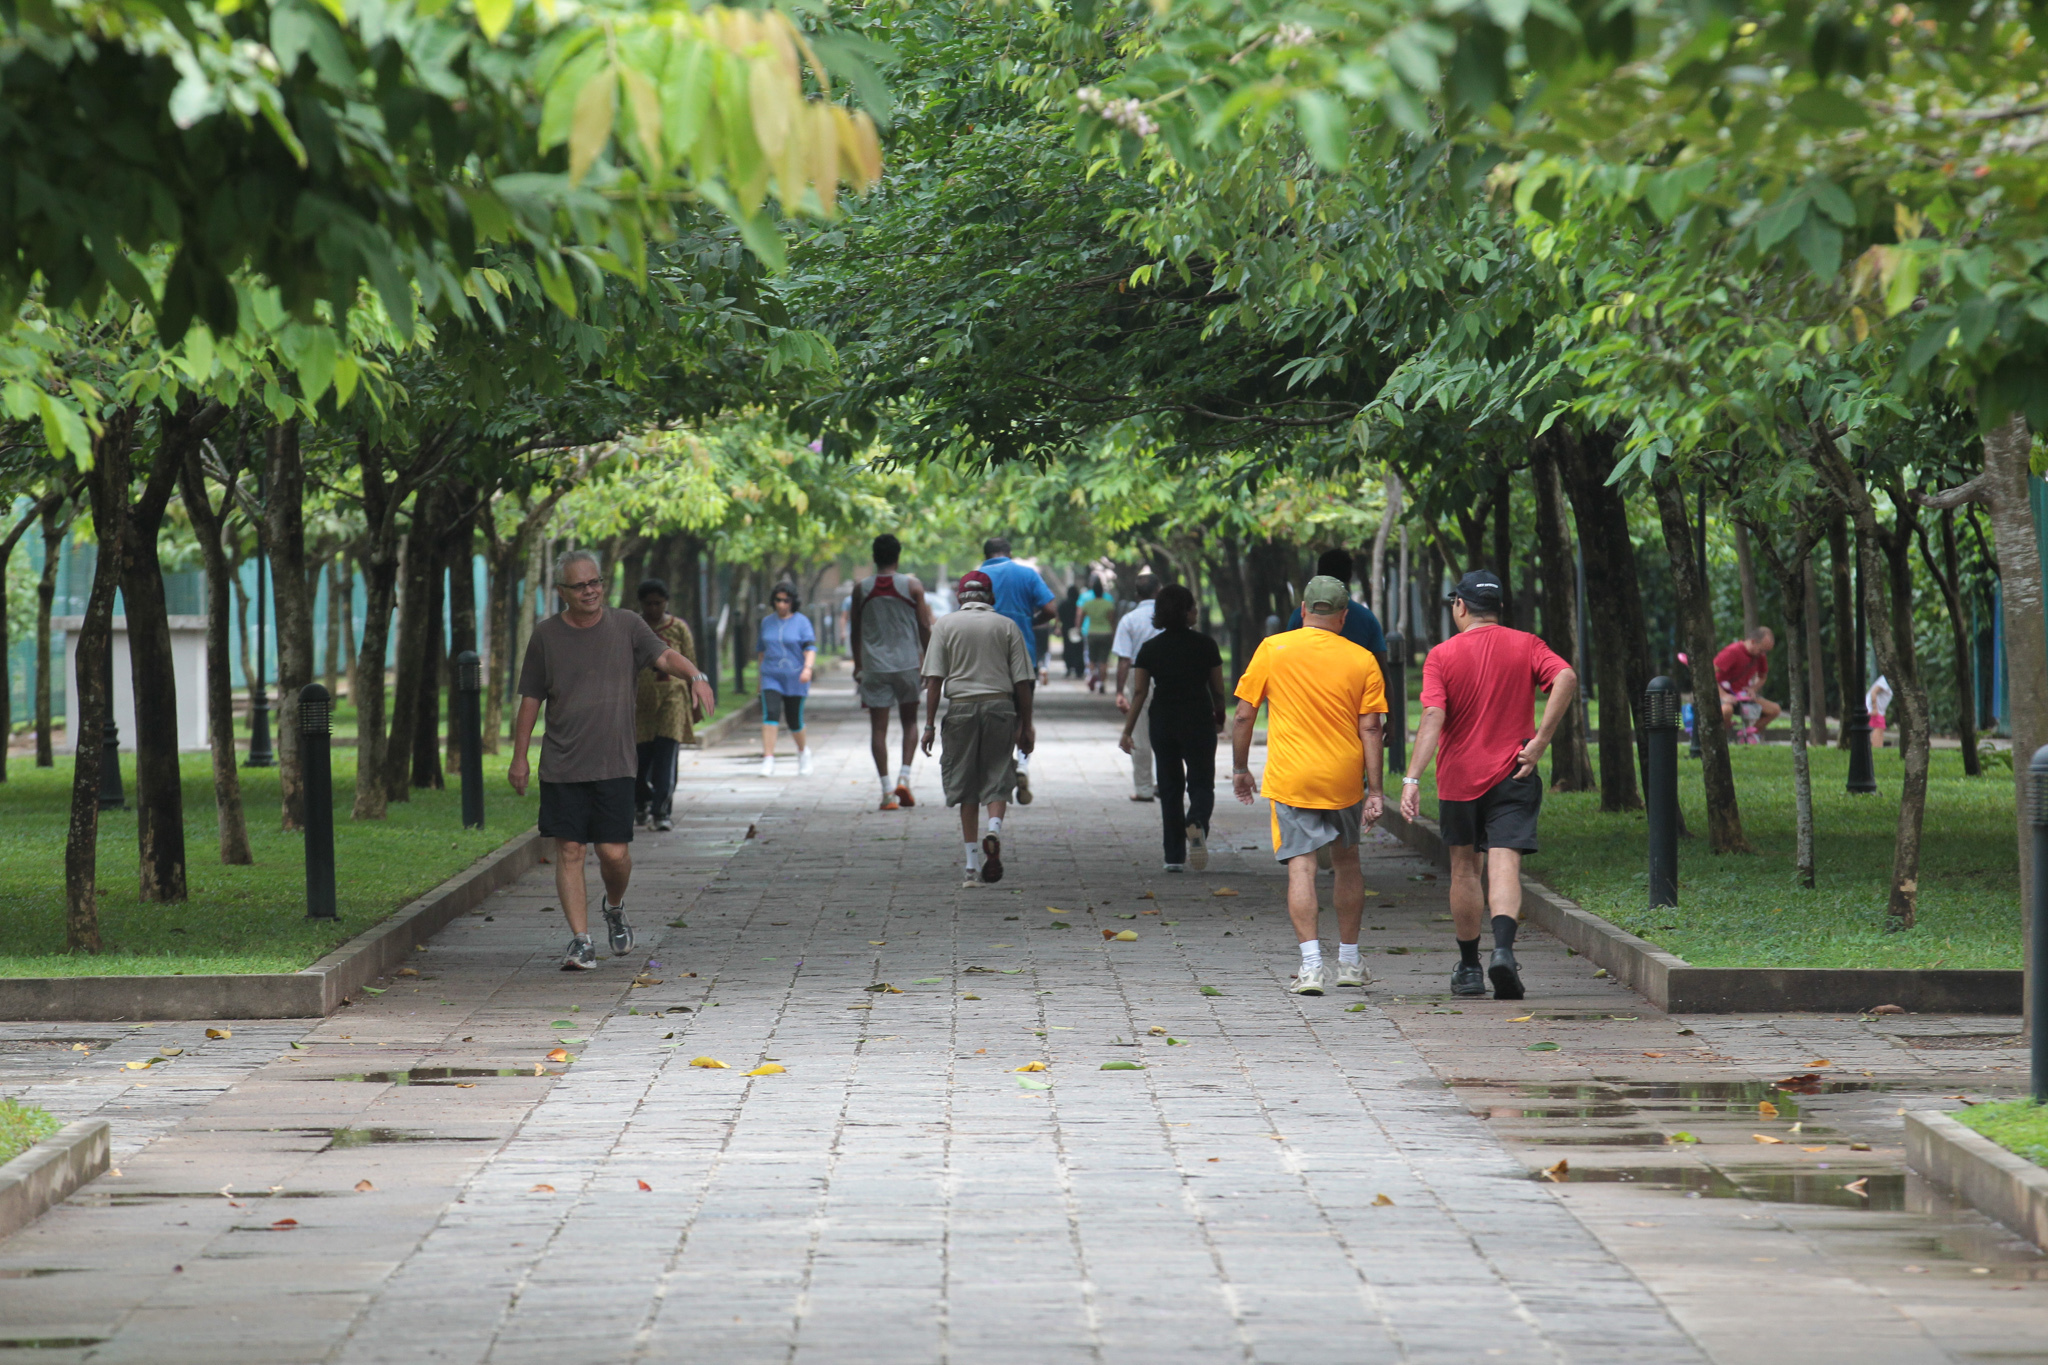 <p>Over 50% of Sri Lankan adults are either inactive or have low levels of physical activity - that is more than 9.5 million adults (Ministry of Health, 2018)</p>